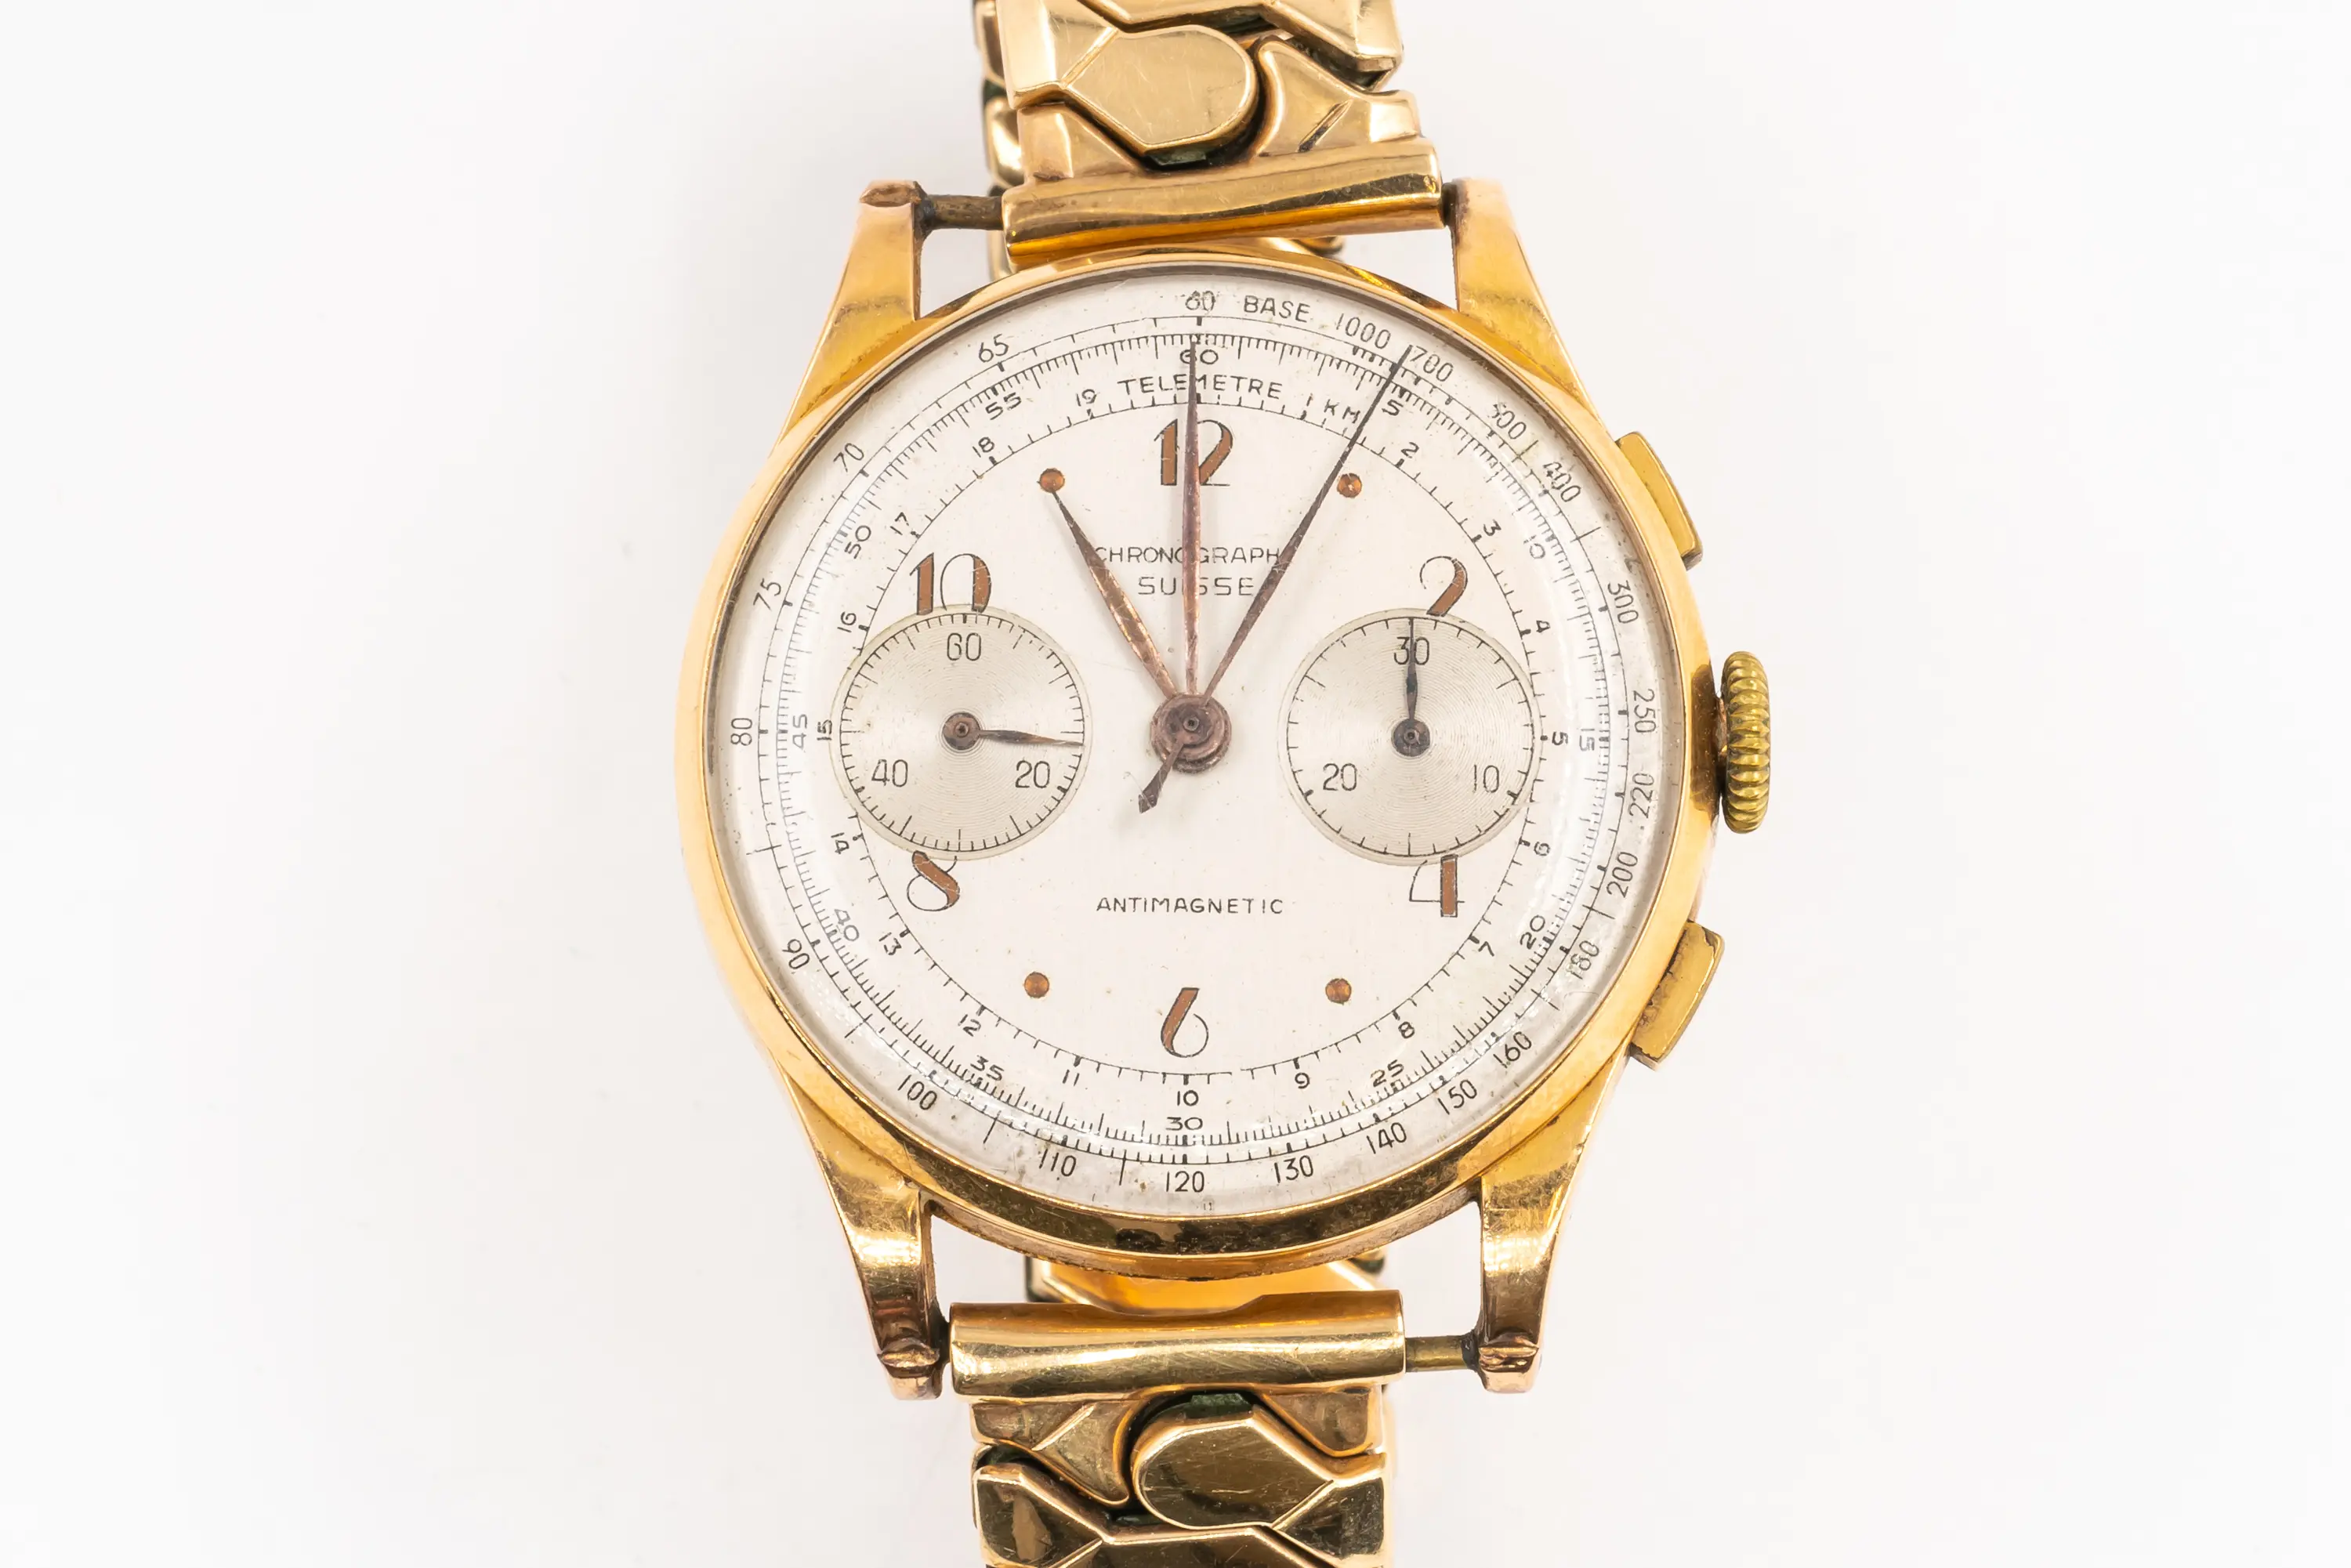 A CHRONOGRAPH SUISSE GOLD WATCH